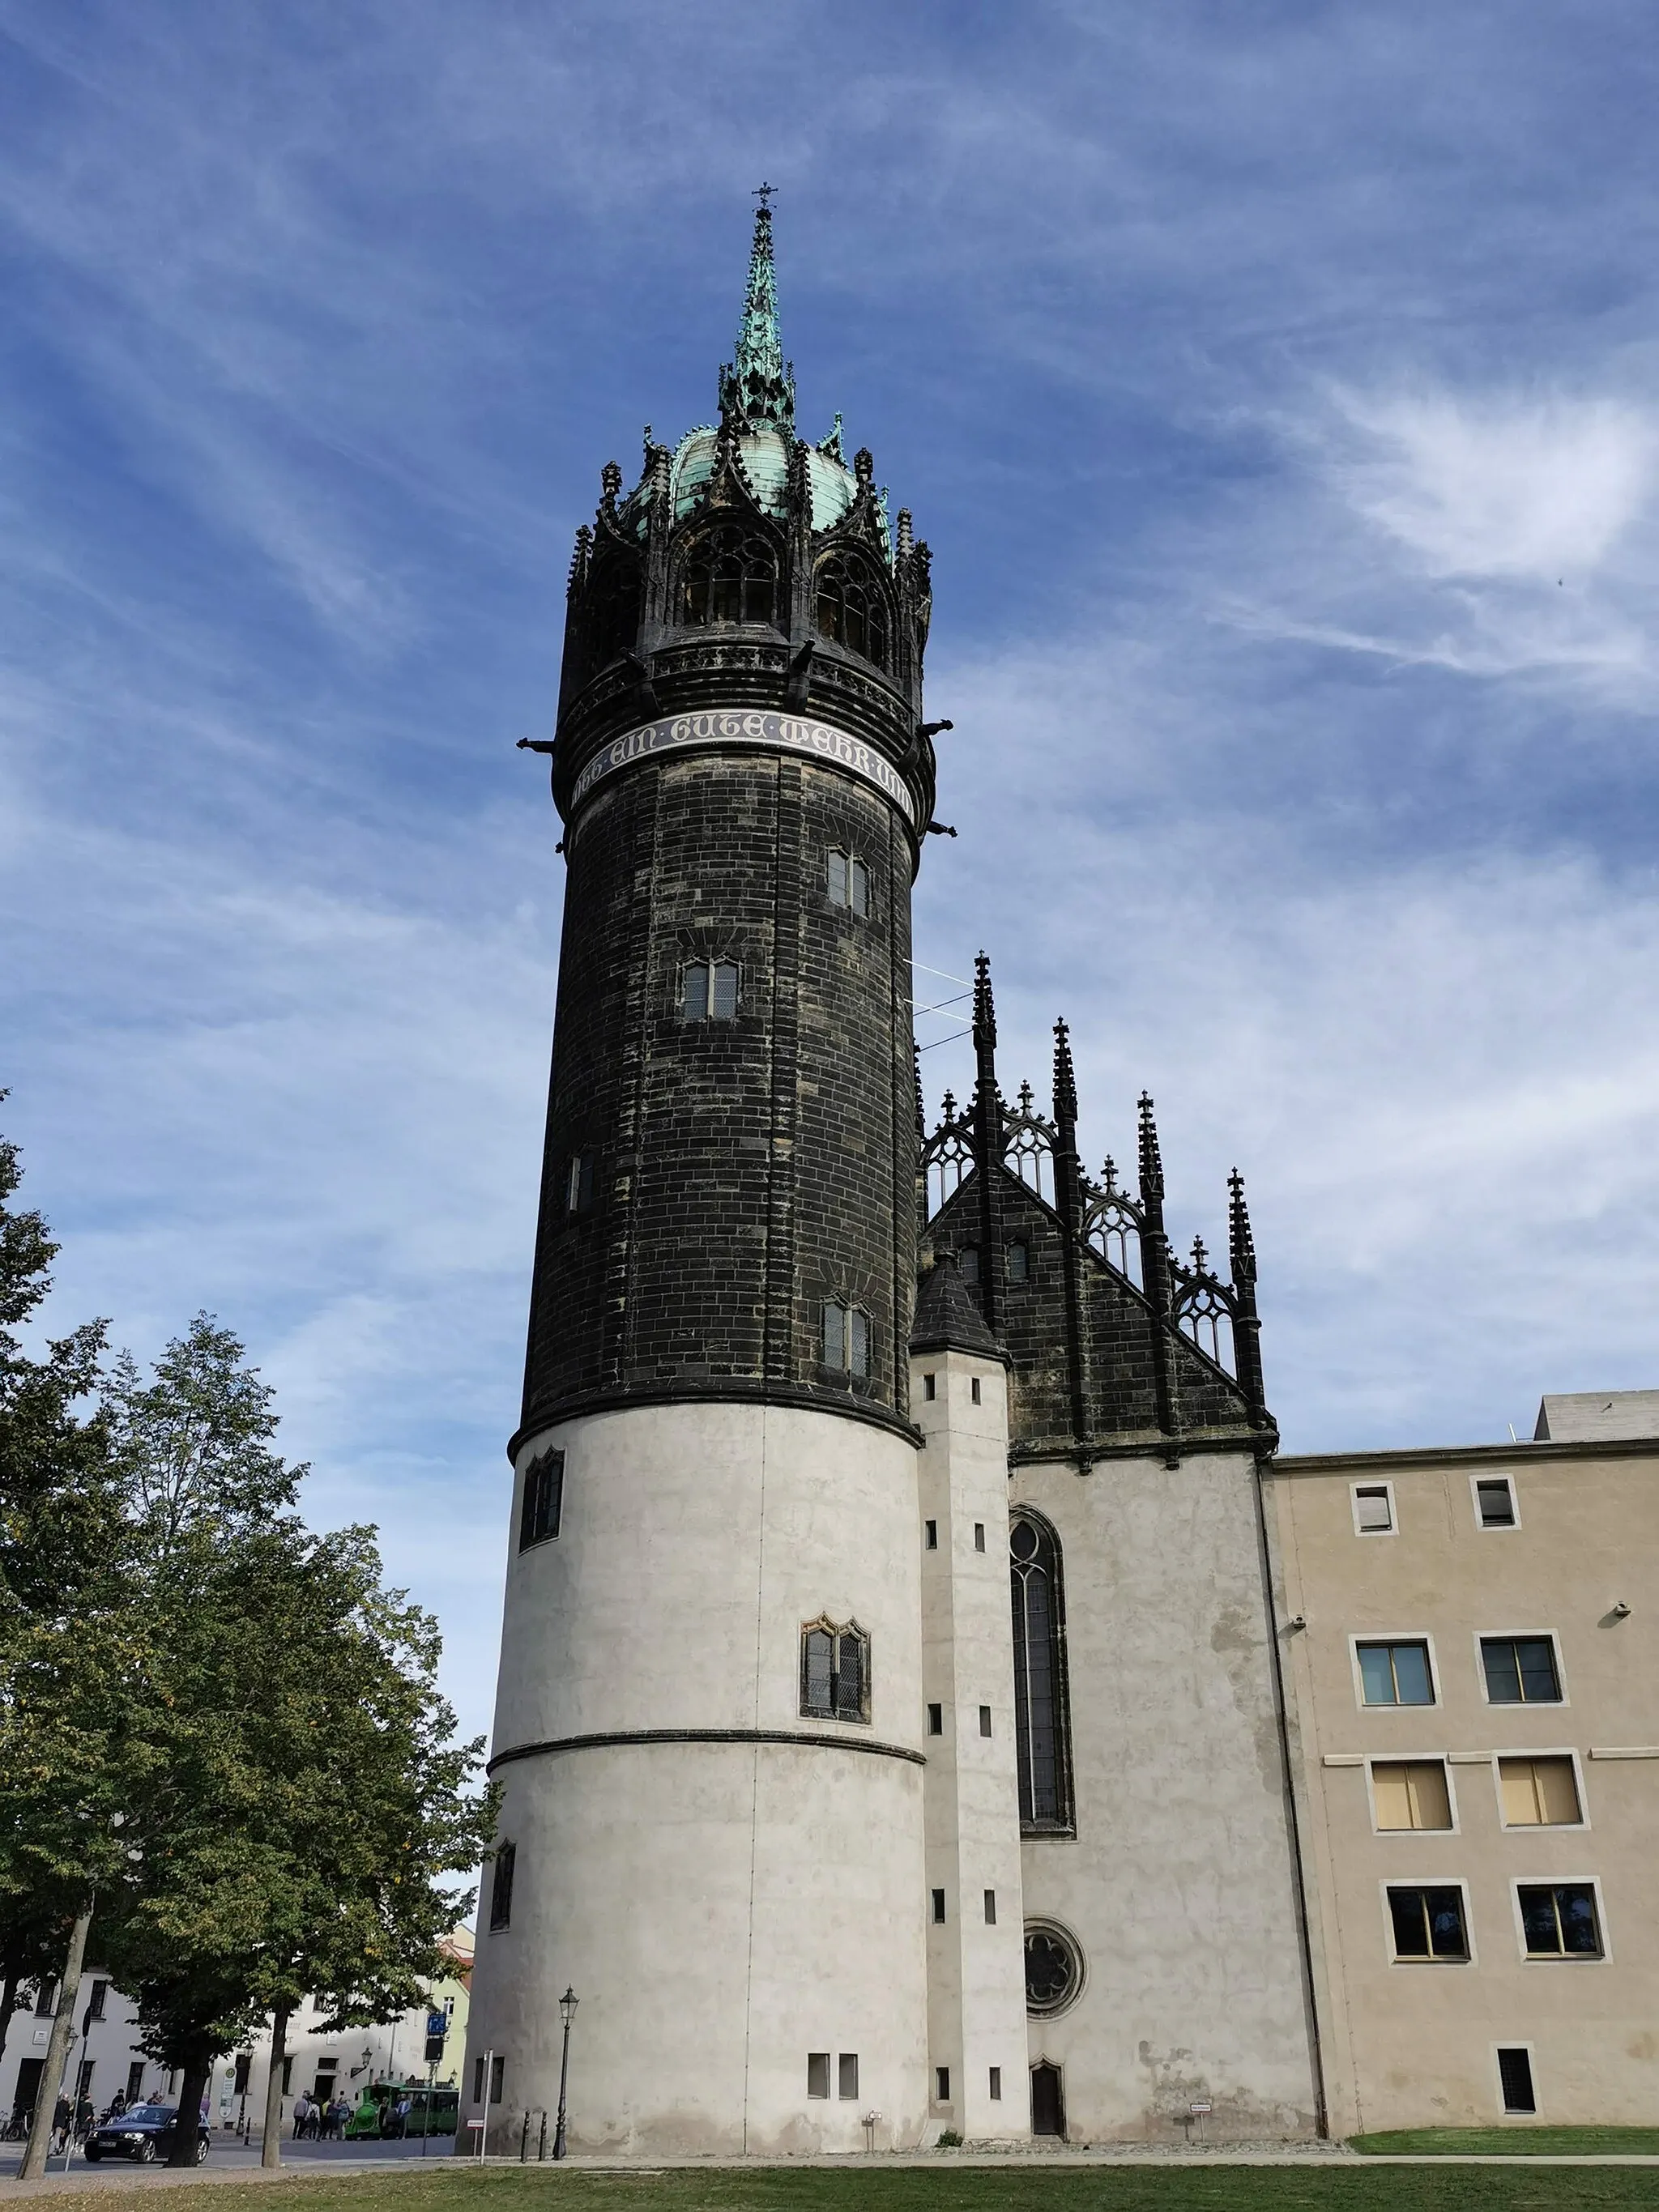 Photo showing: The Schlosskirche in Lutherstadt Wittenberg